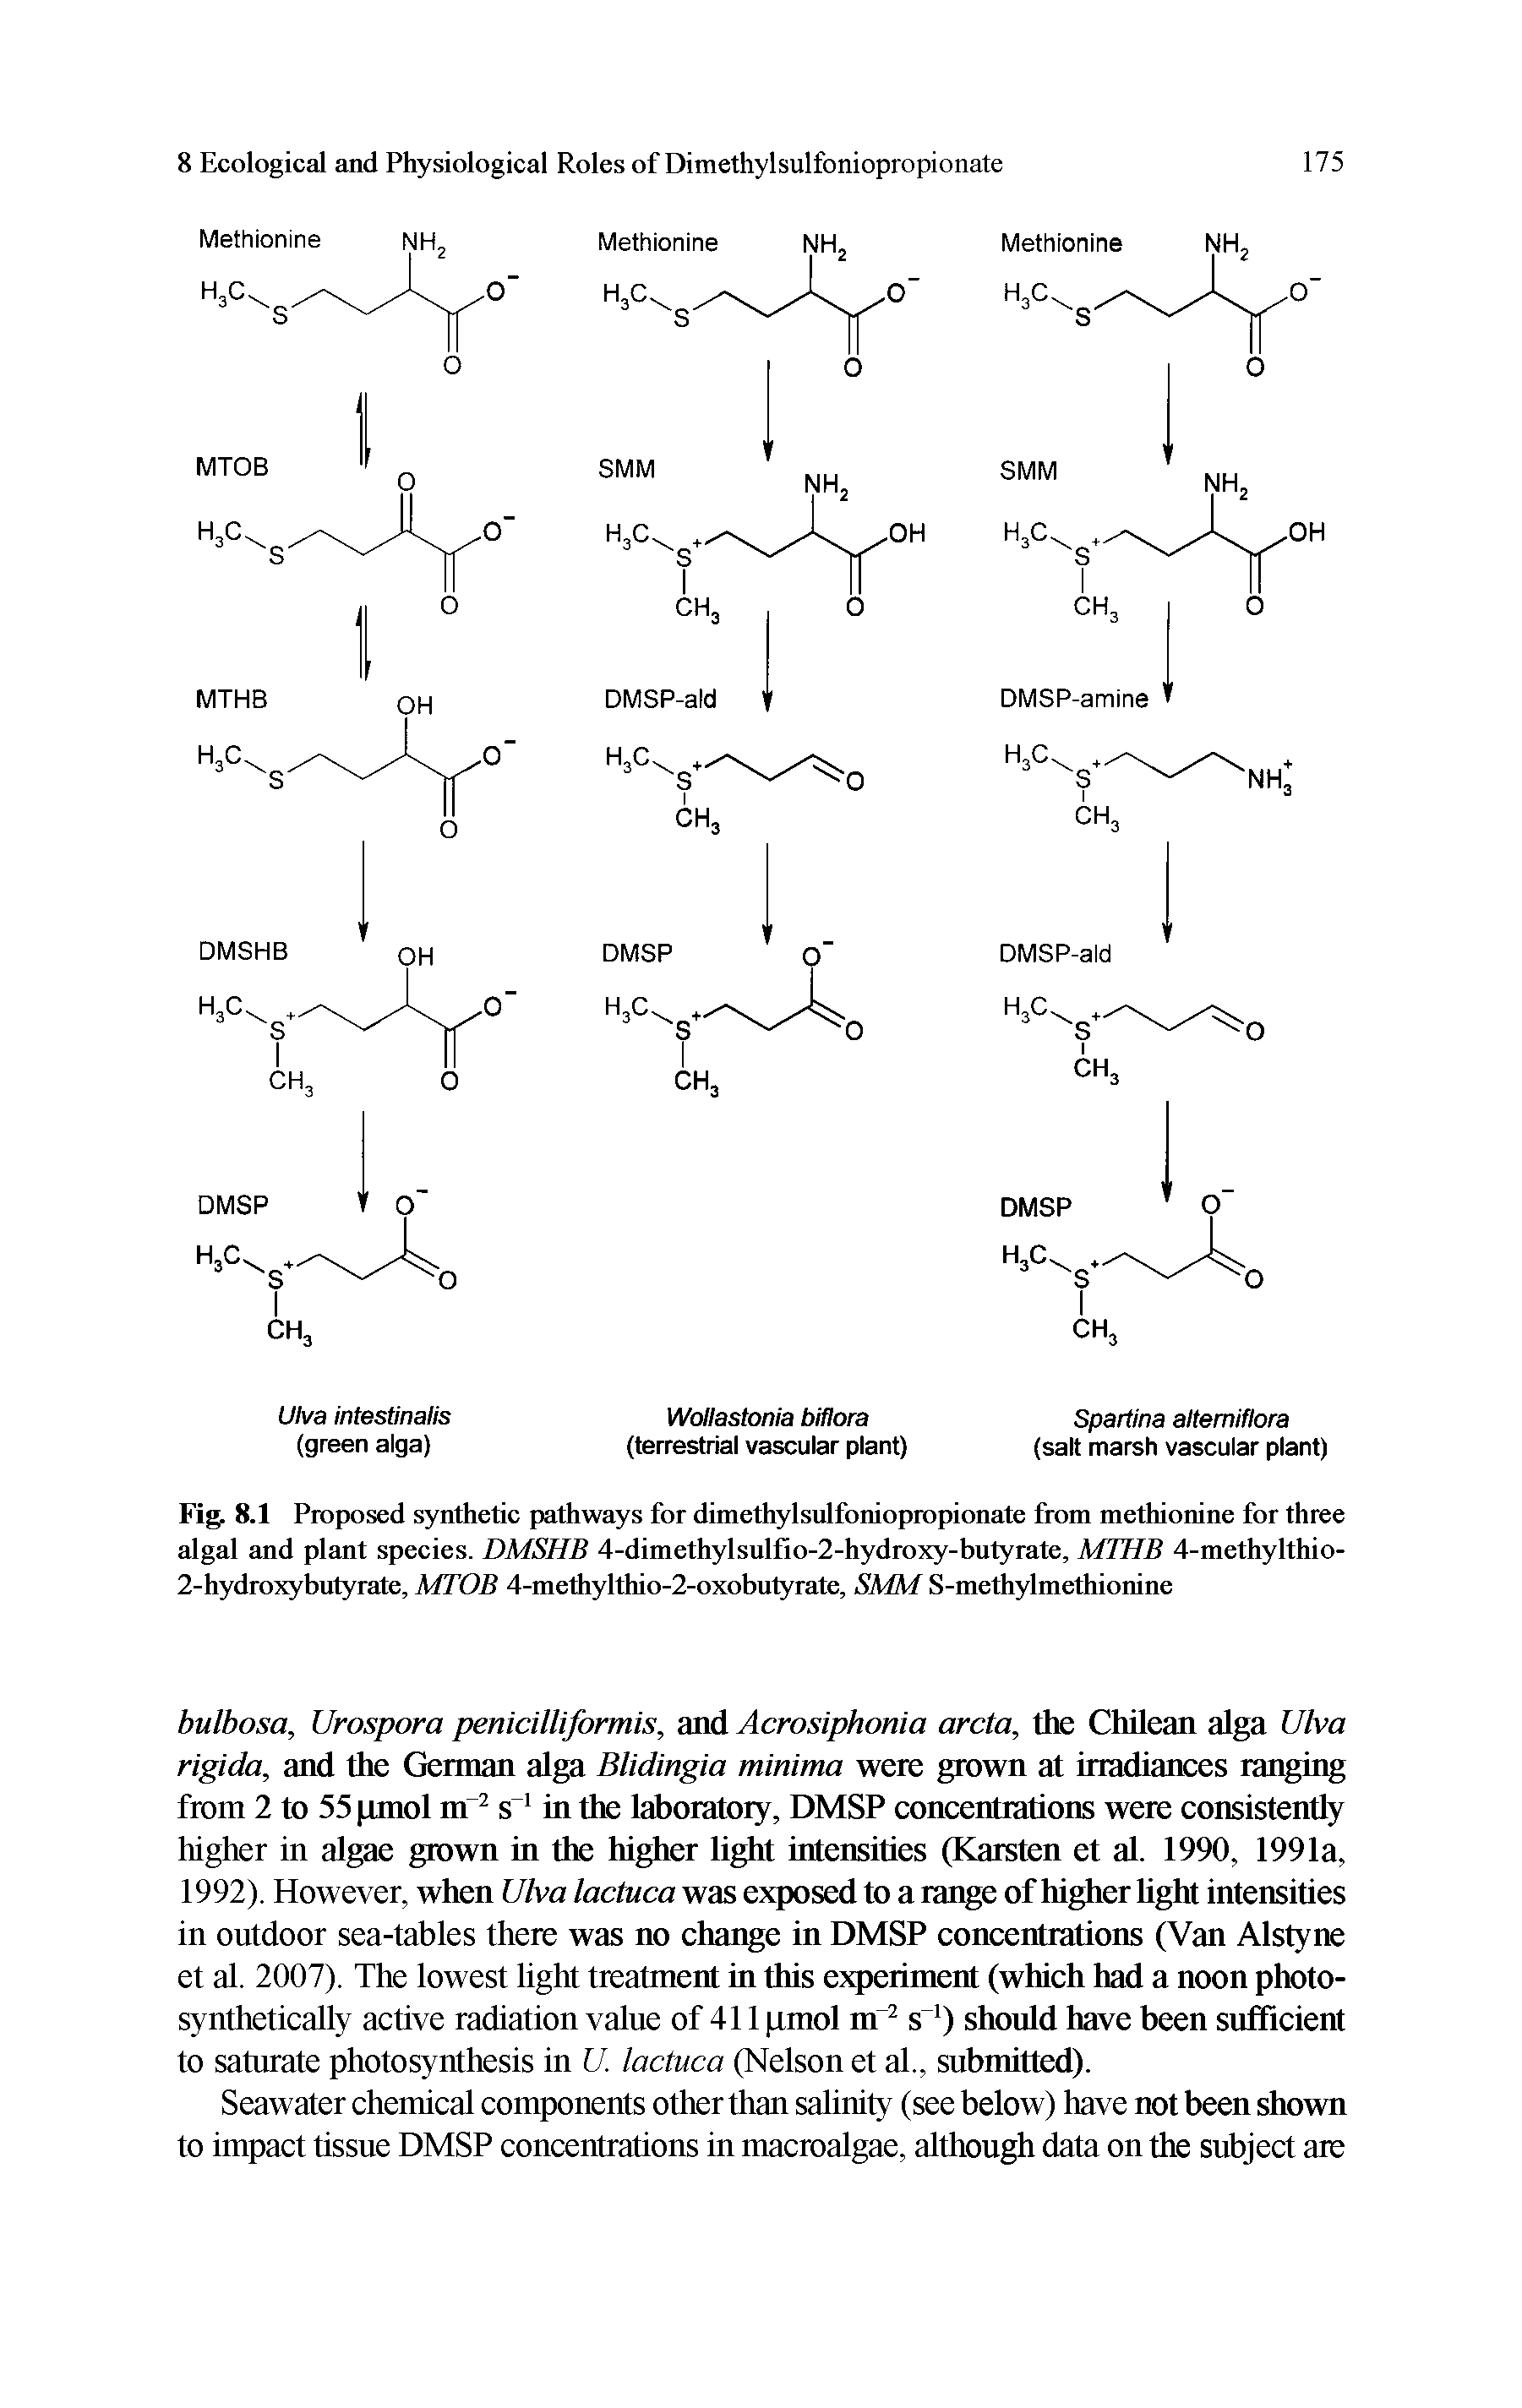 Fig. 8.1 Proposed synthetic pathways for dimethylsulfoniopropionate from methionine for three algal and plant species. DMSHB 4-dimethylsulfio-2-hydroxy-butyrate, MTHB 4-methylthio-2-hydroxybutyrate, MTOB 4-methylthio-2-oxobutyrate, SMM S-methylmethionine...